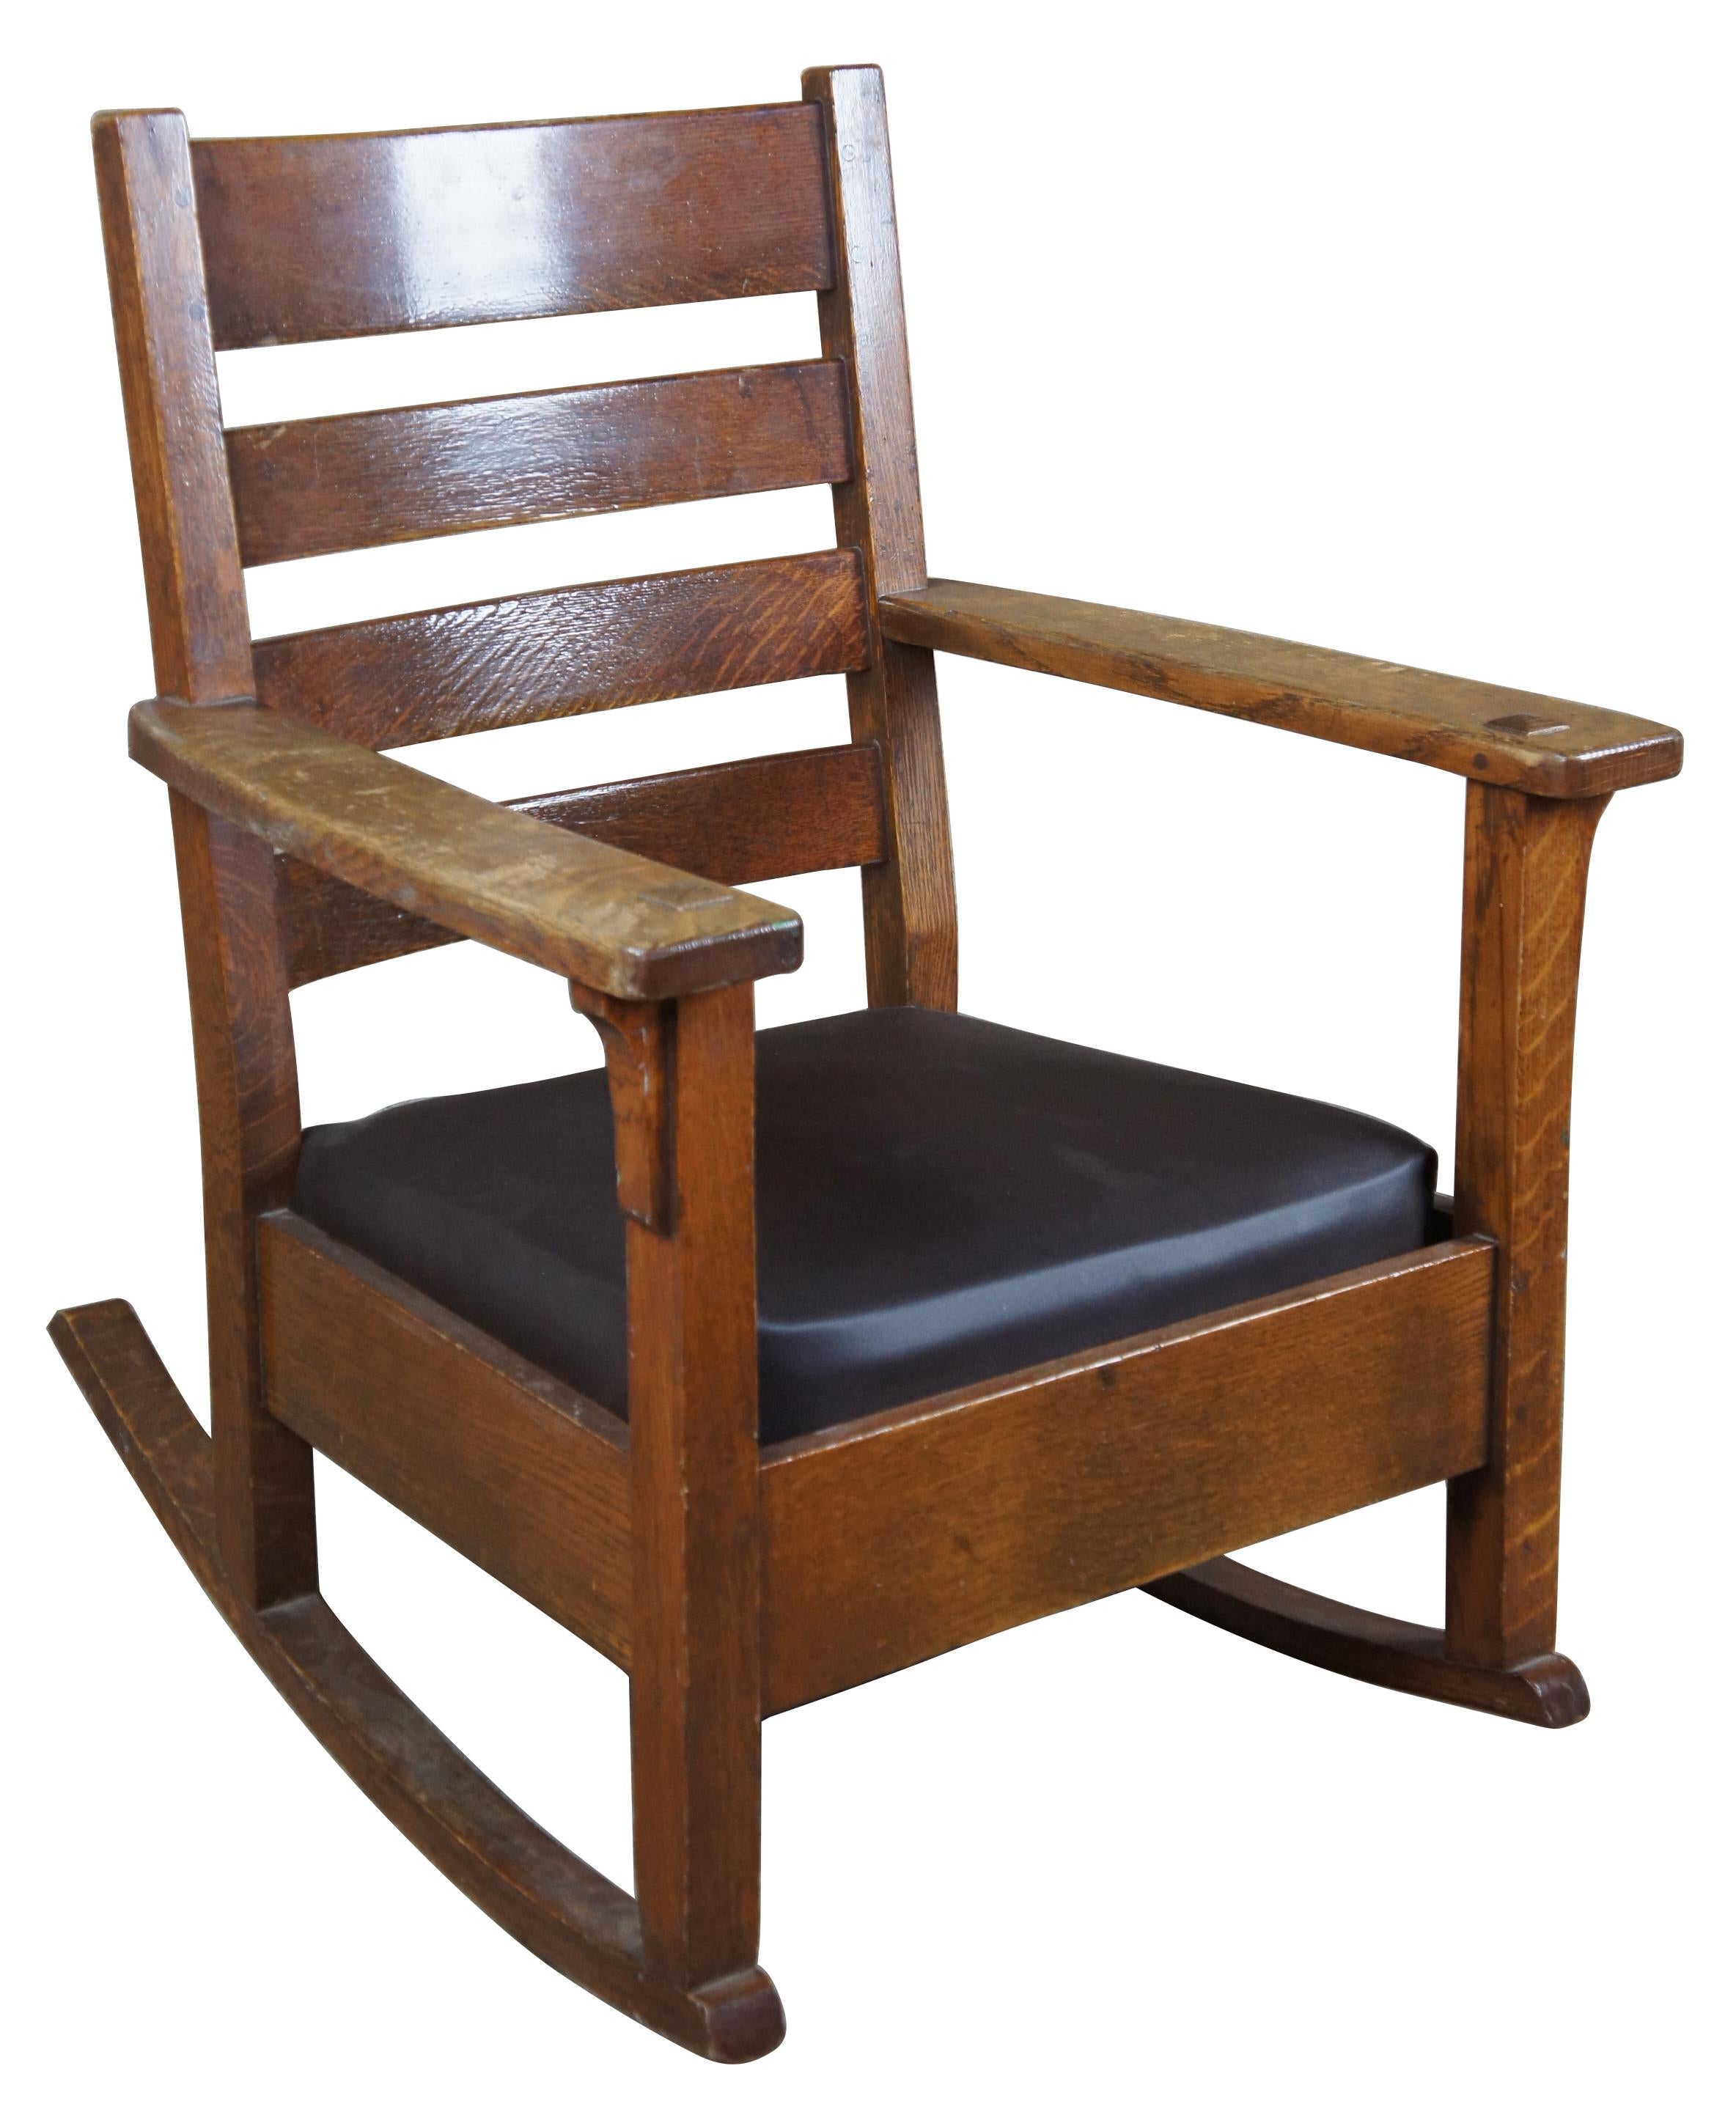 Limbert rocker, circa 1920s. Made from quartersawn oak with vinyl seat, stamped along underside of arm. Charles P. Limbert was an American furniture designer. He is considered one of the most successful furniture leaders in the history of Grand